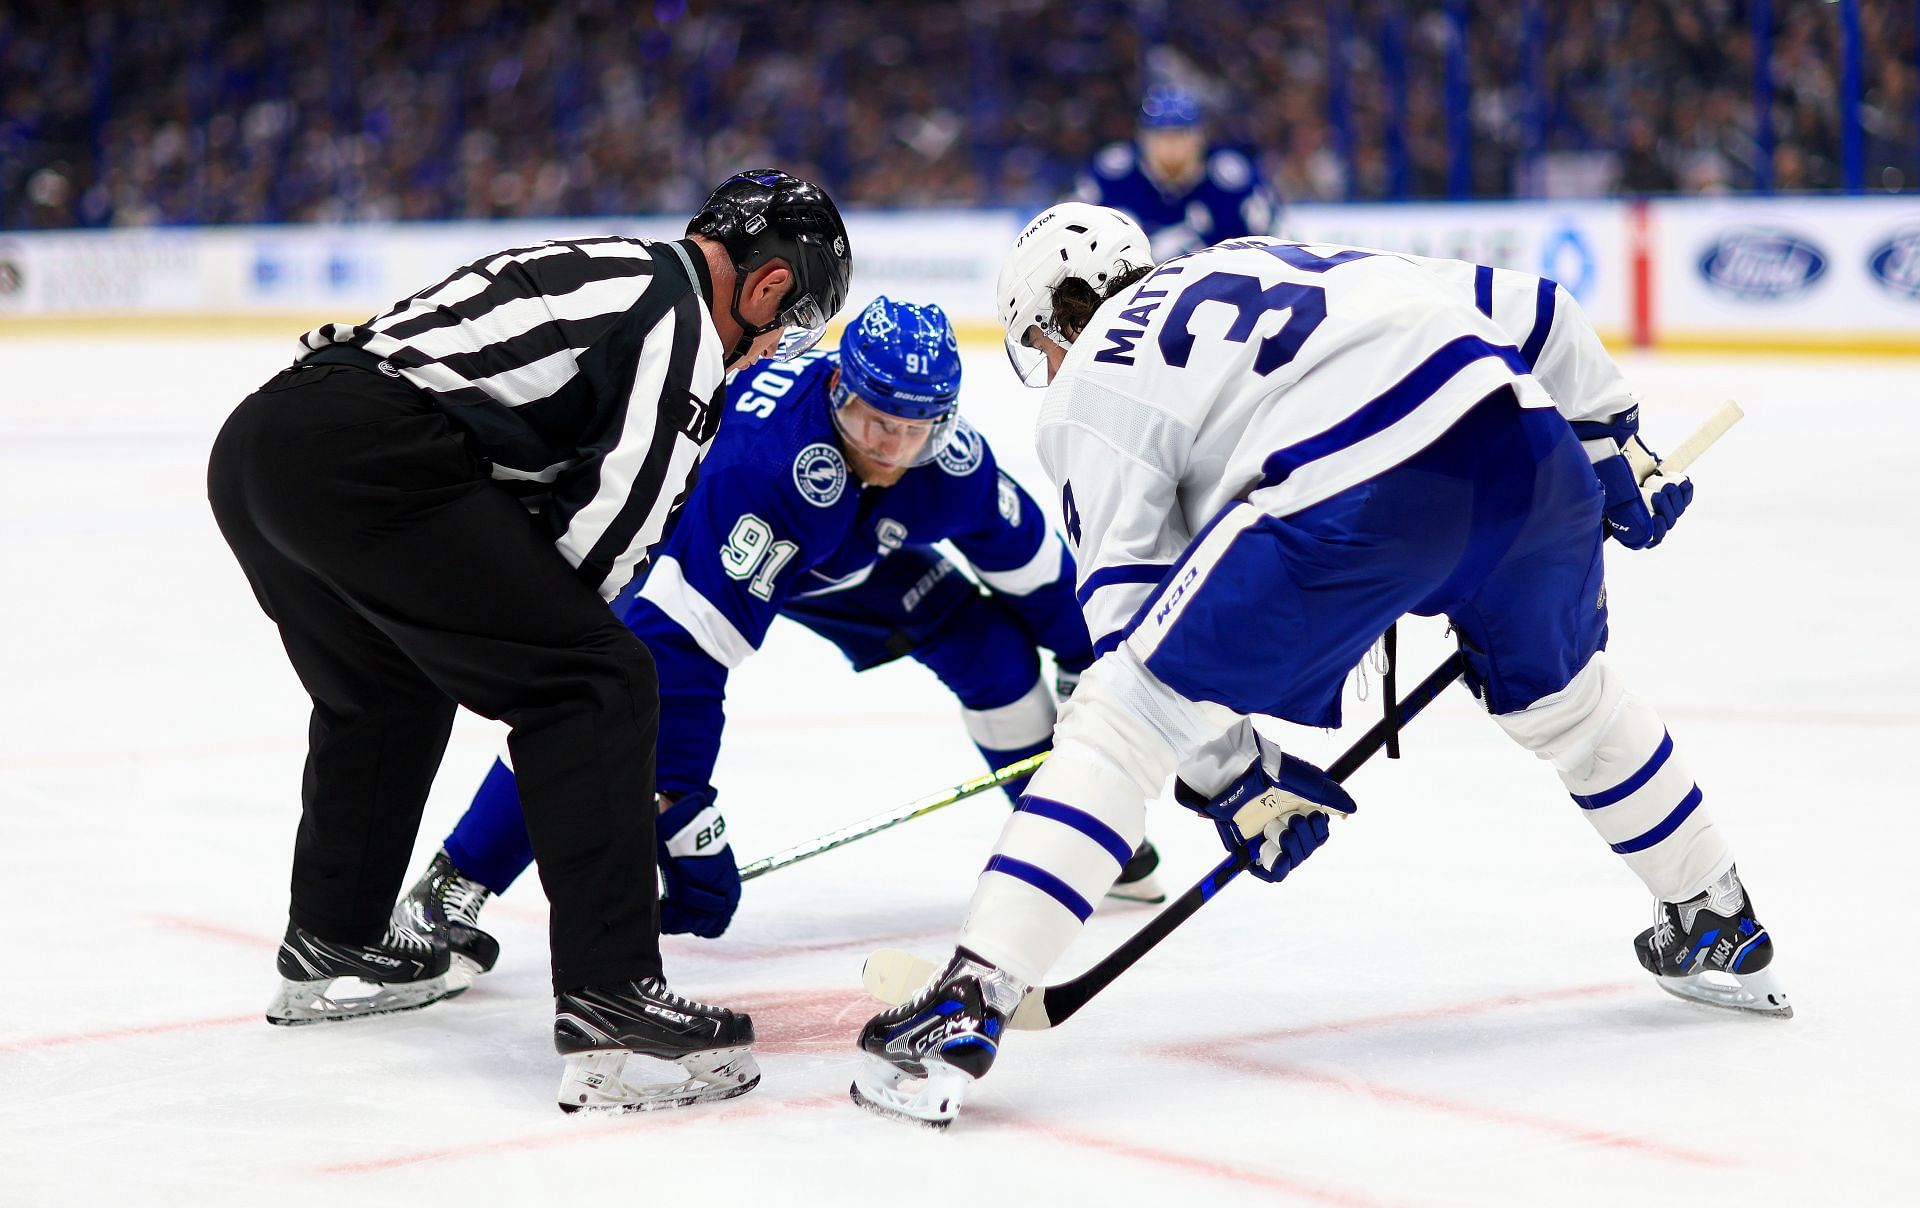 Is Lightning star Brayden Point playing in Game 4 vs. Maple Leafs?